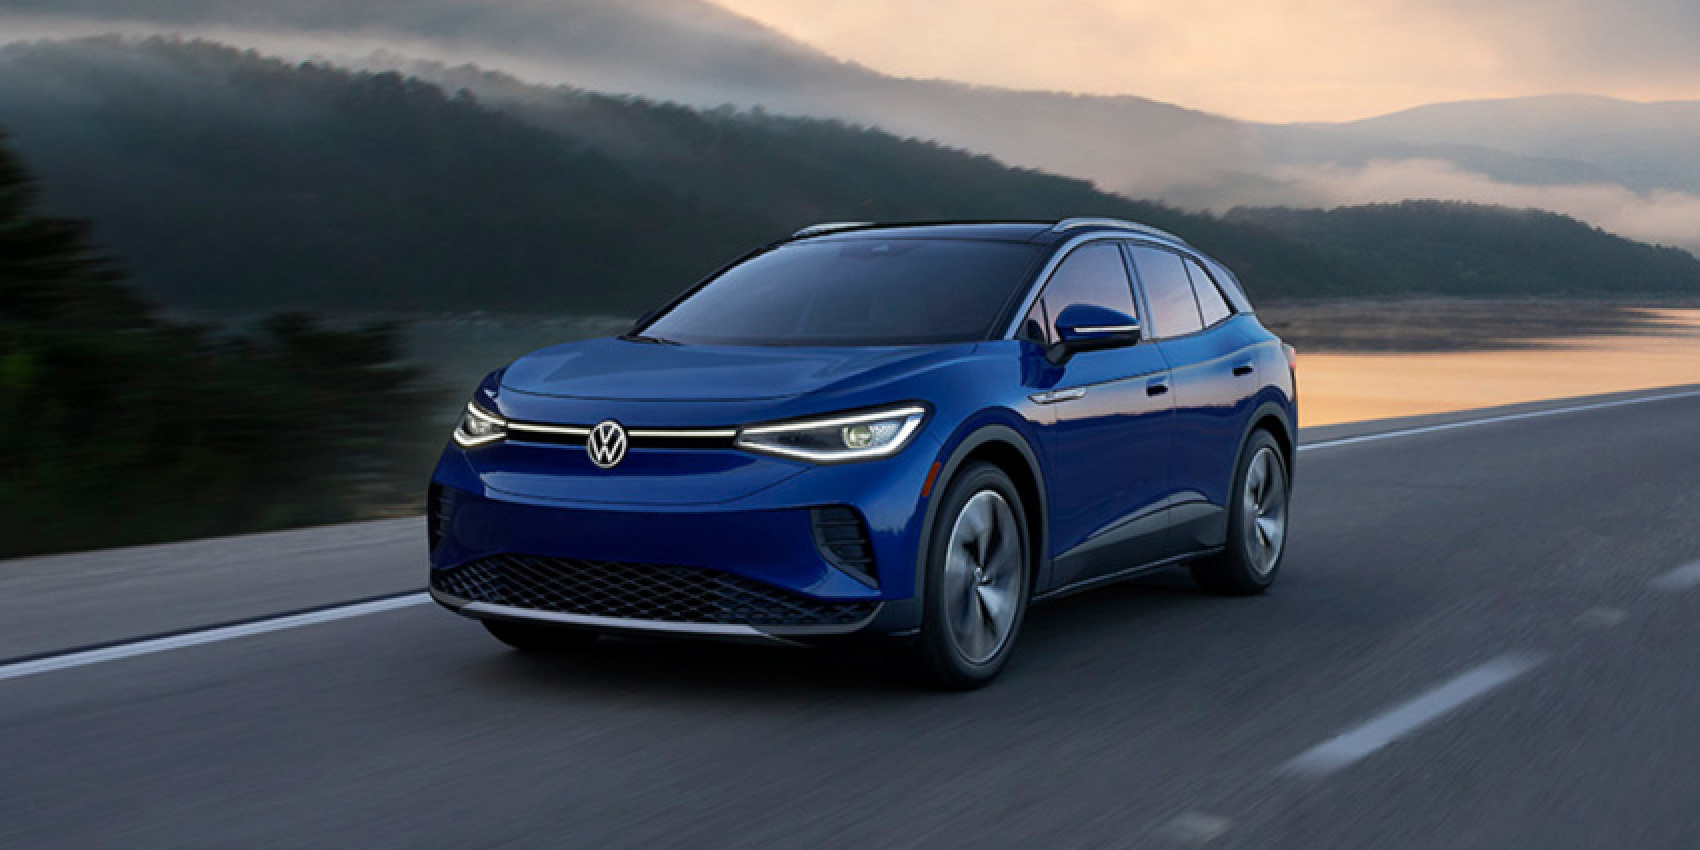 autos, cars, volkswagen, volkswagen shares epa ranges for 2022 id.4, rwd pro model sees 20 mile increase compared to 2021